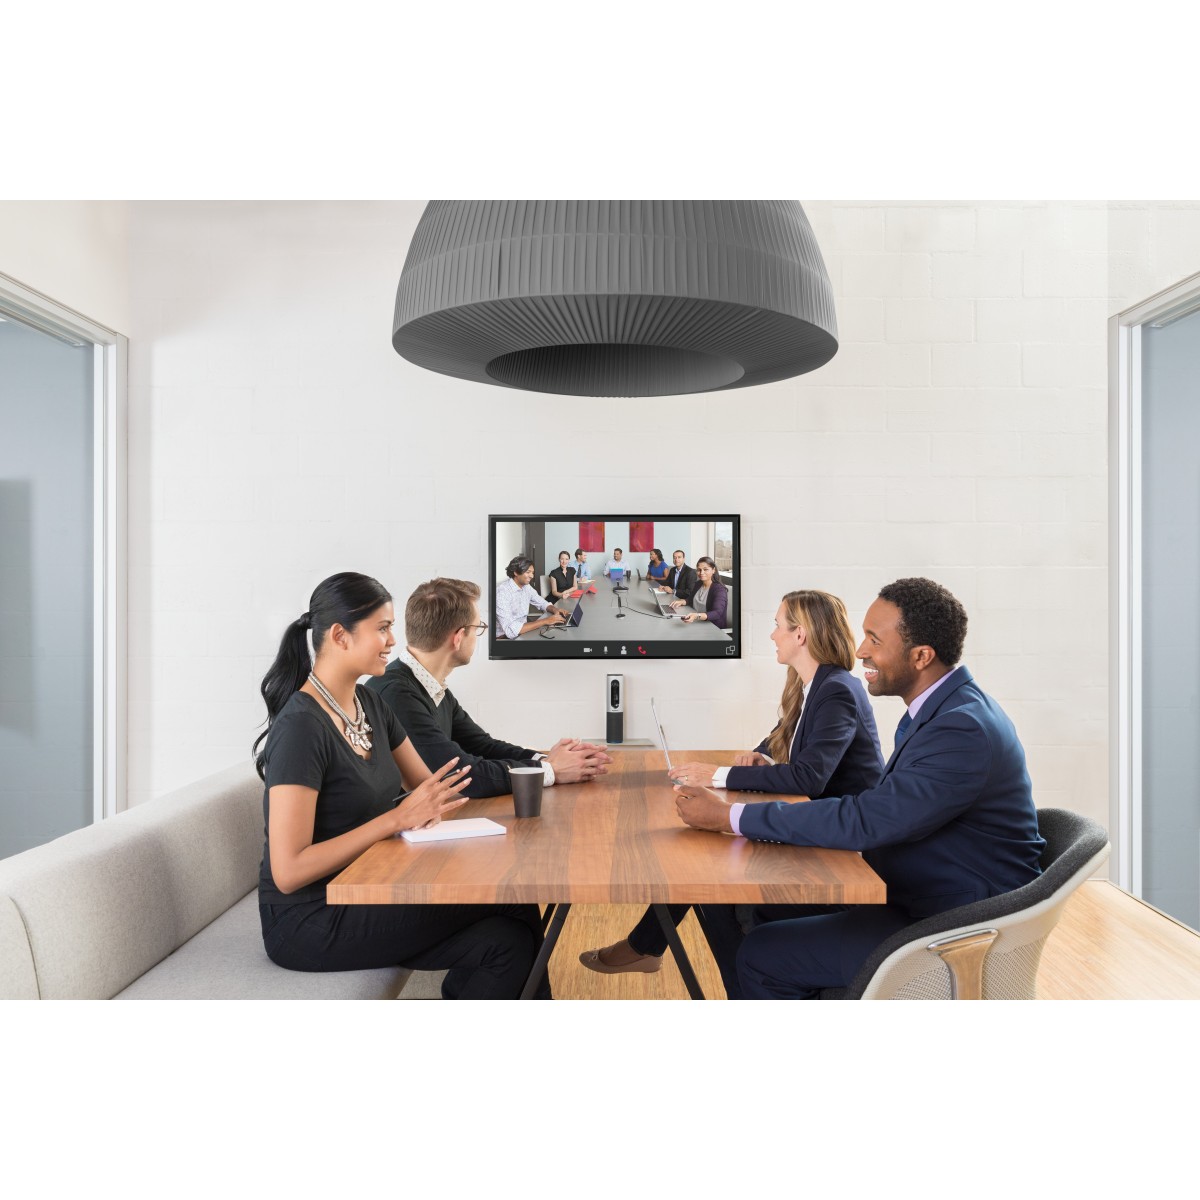 Logitech ConferenceCam Connect Video Conferencing Camera - 30 fps - Silver - USB - 1920 x 1080 Video - Auto-focus - 4x Digital Z